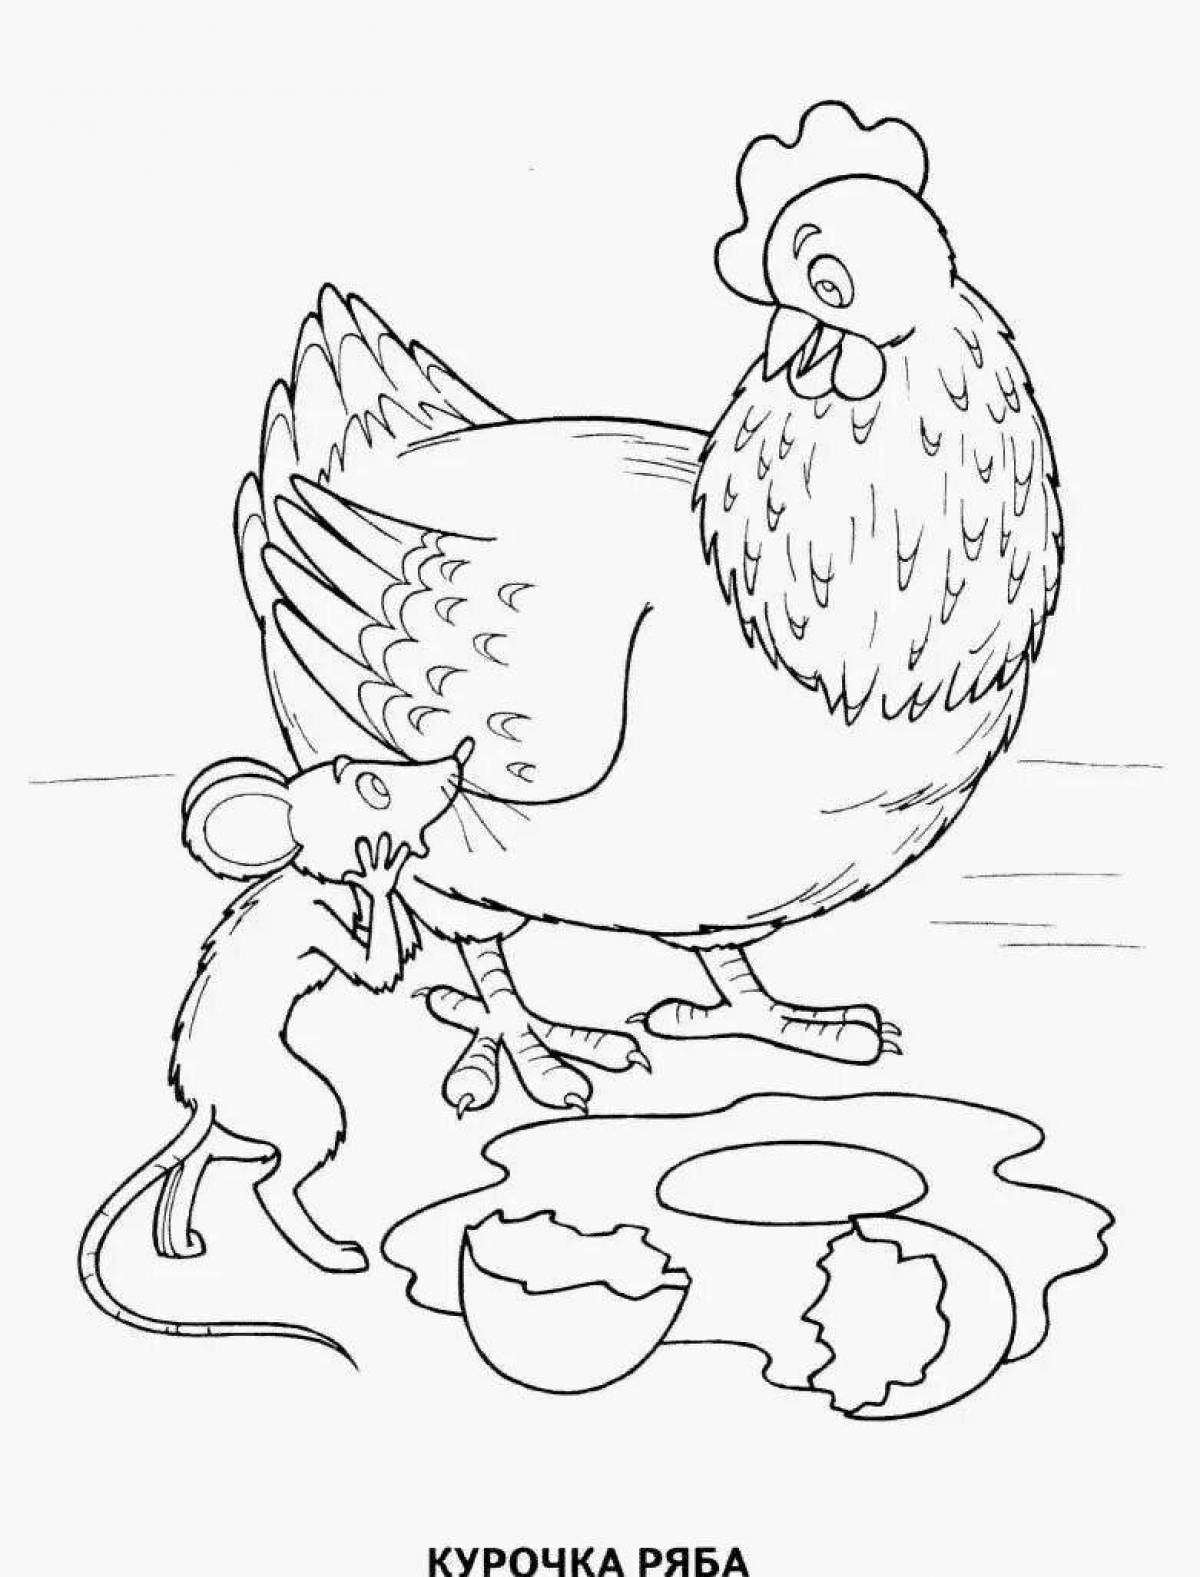 Adorable chick pockmarked coloring page for preschoolers